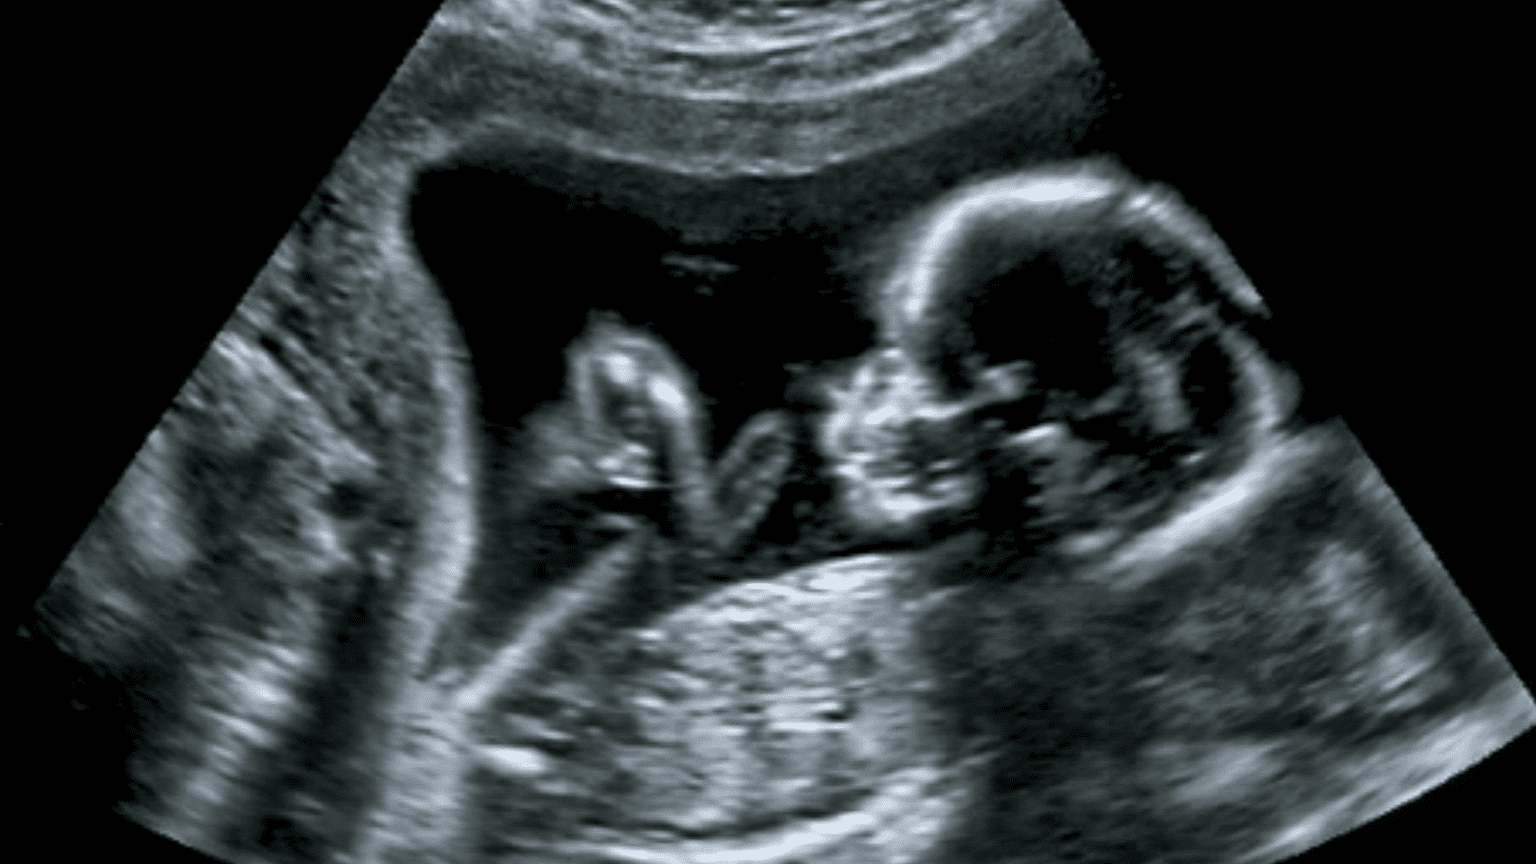 Debunking the Pro-abortion Narrative from a Secular Perspective